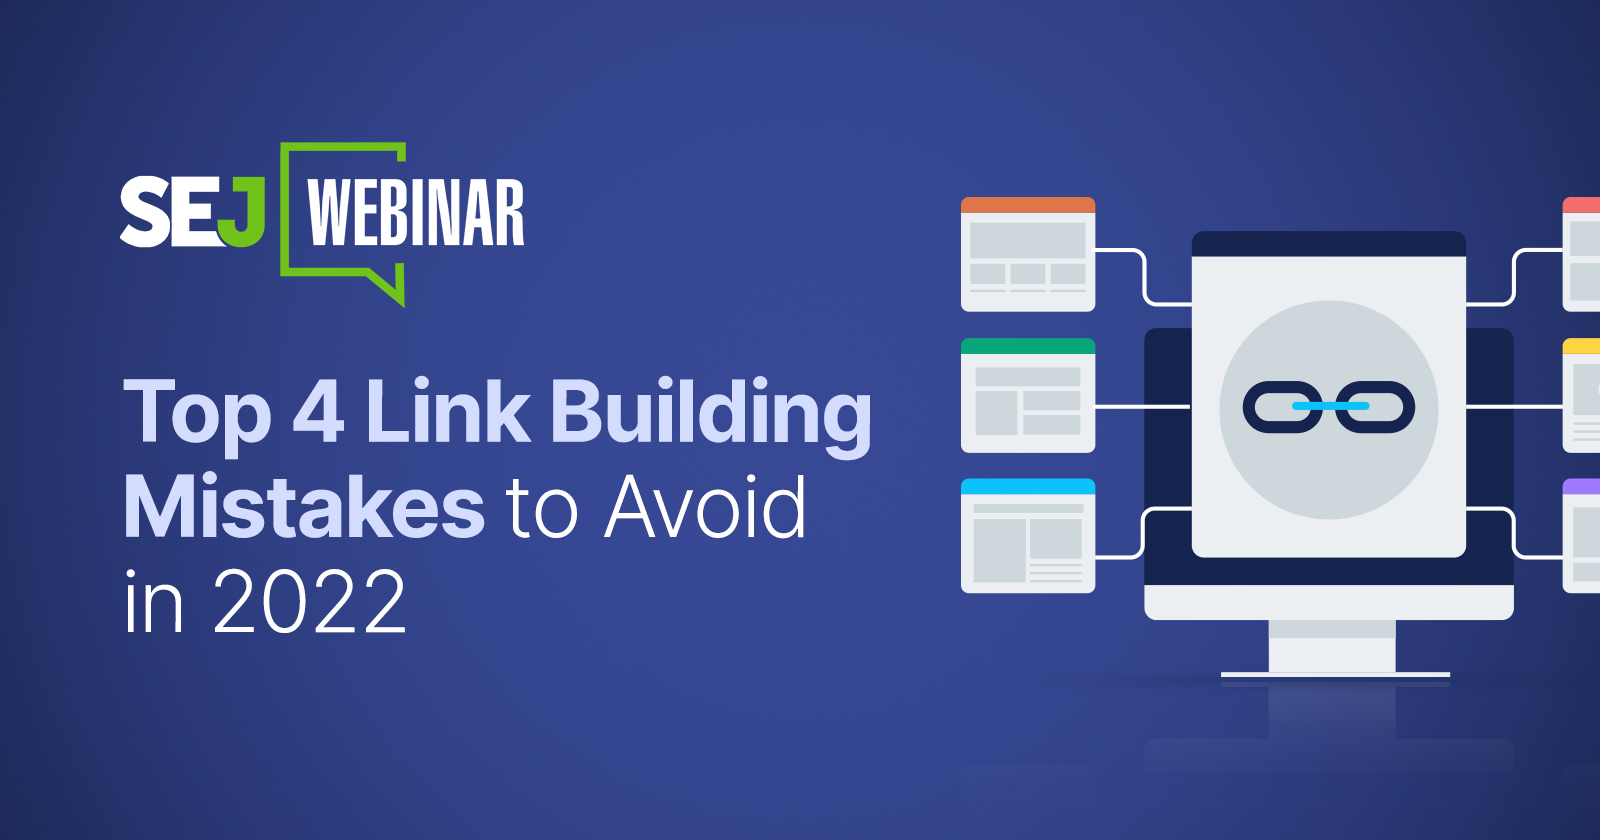 Top 4 Link Building Mistakes To Avoid In 2022 via @sejournal, @hethr_campbell